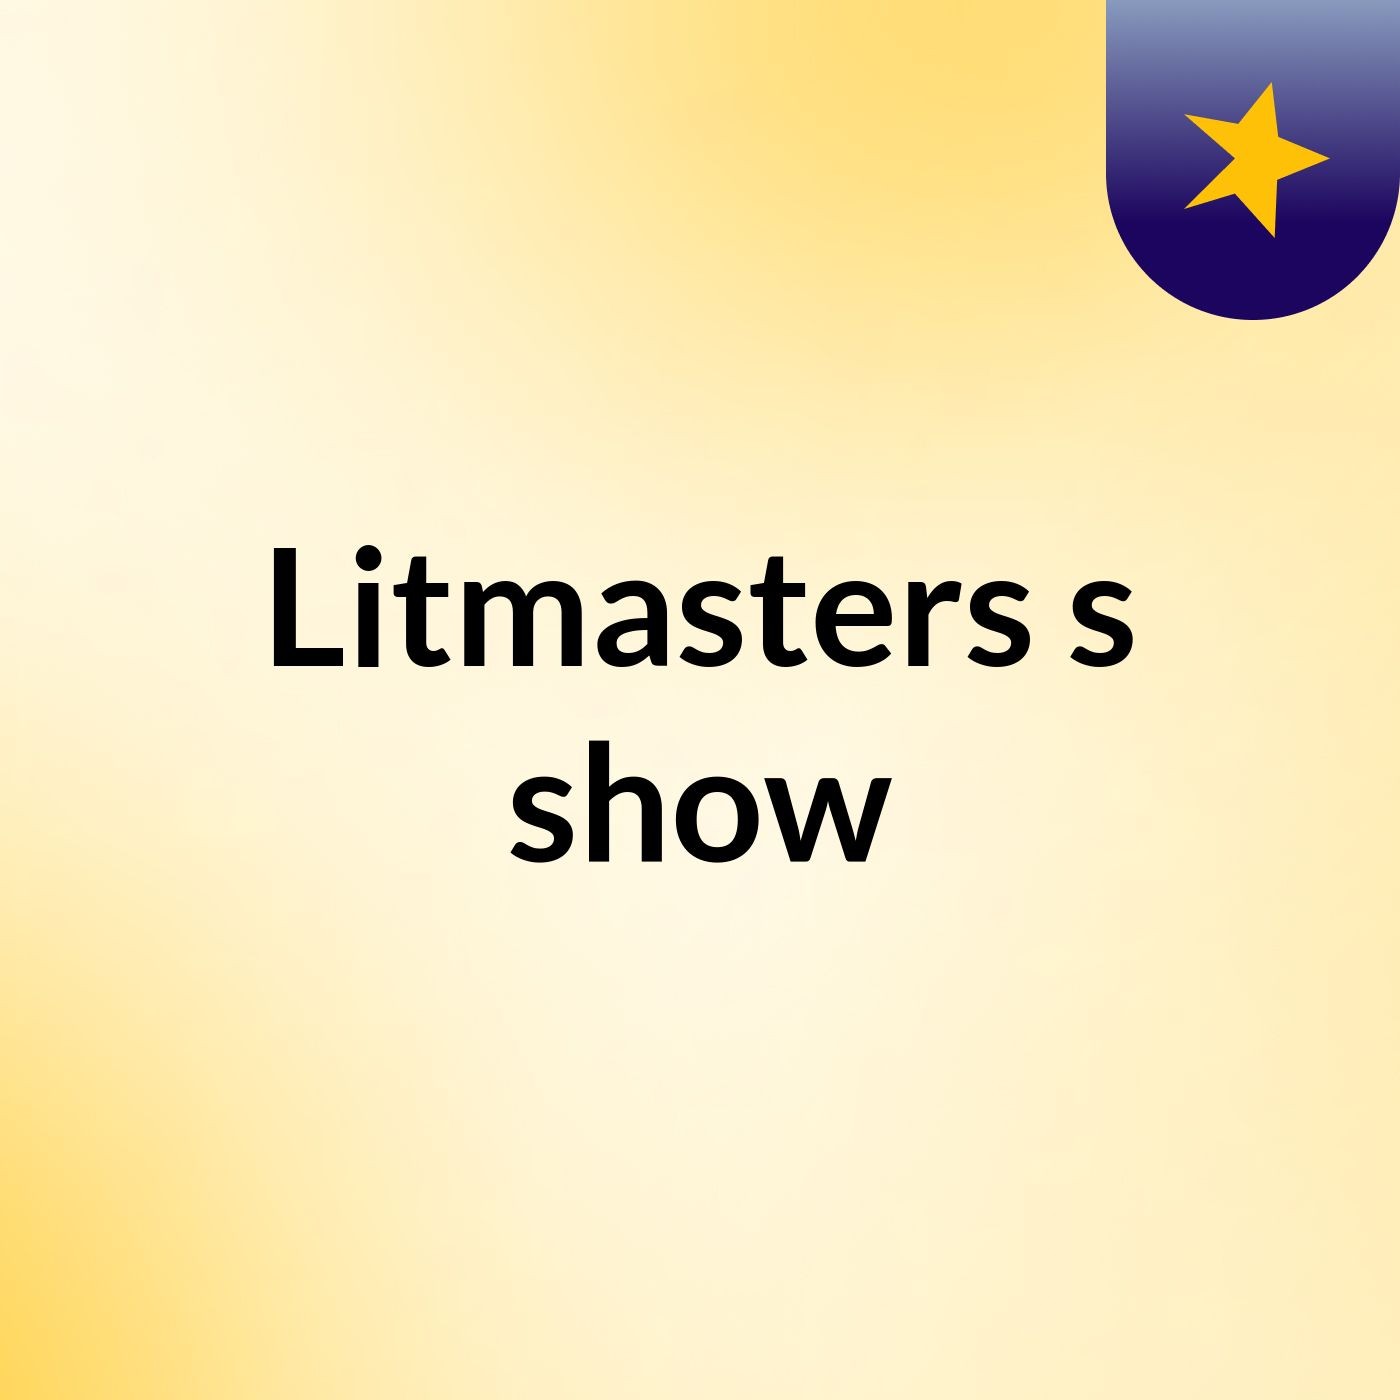 Litmasters's show